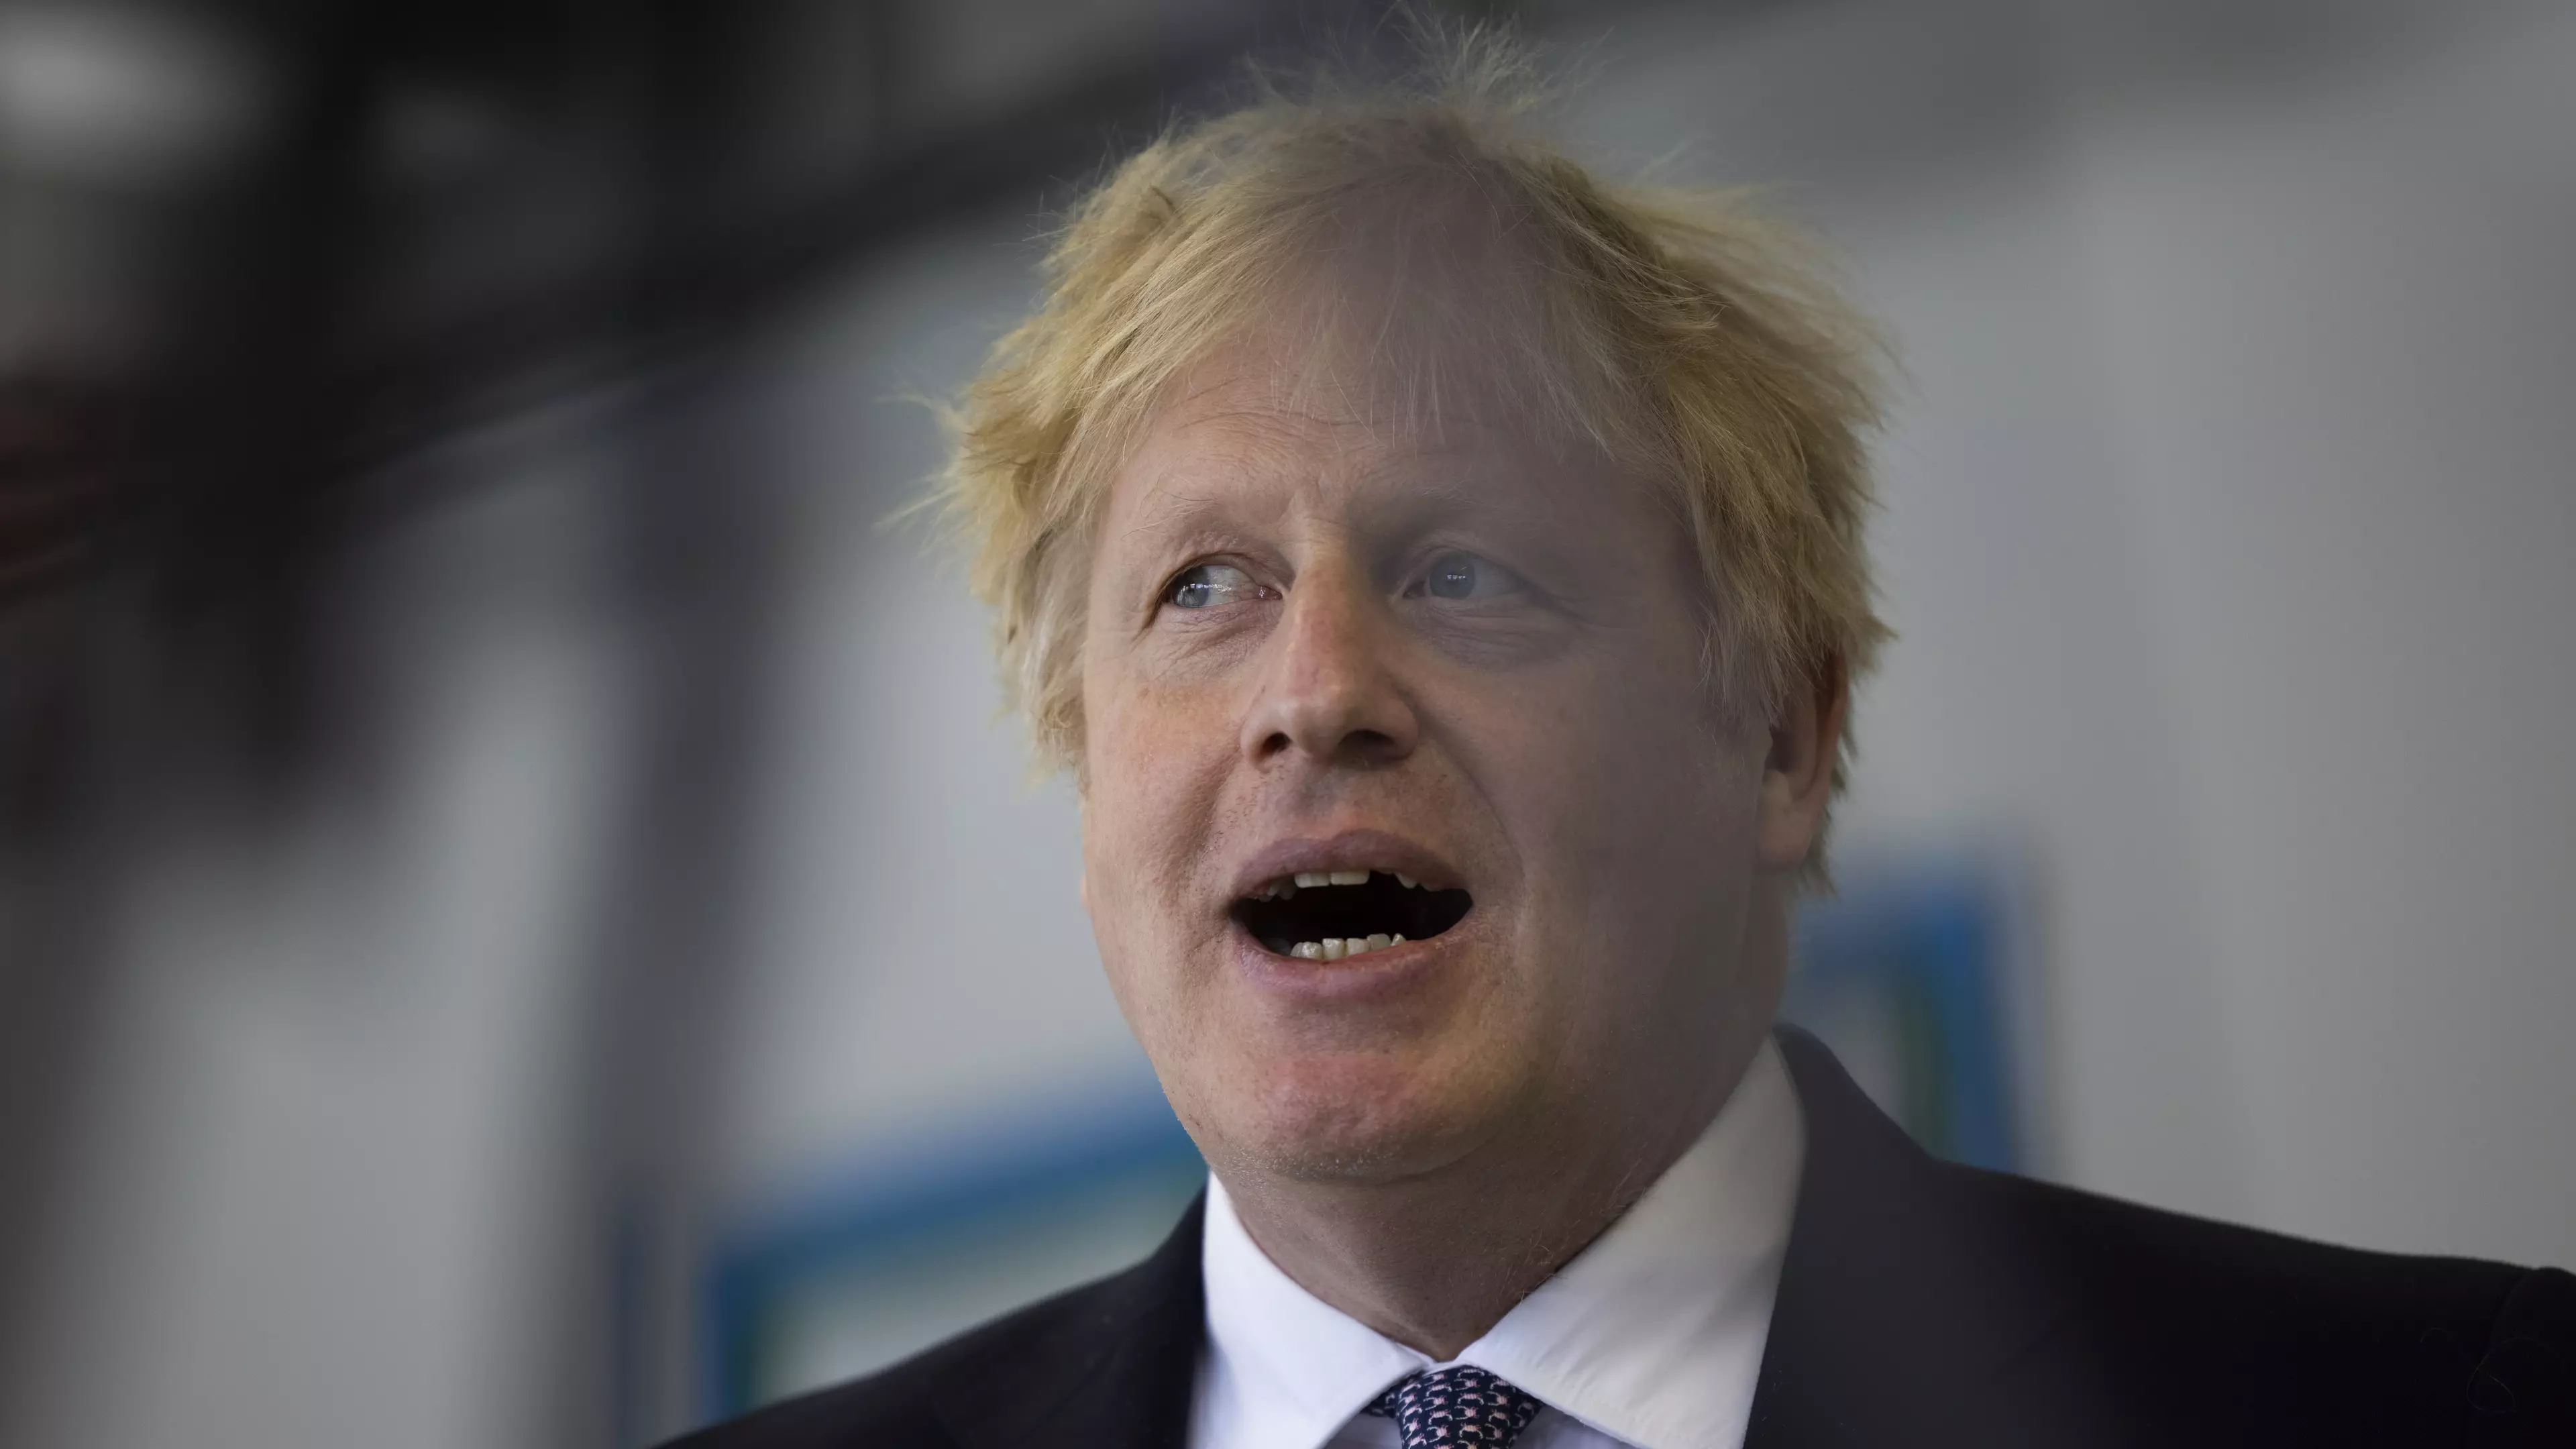 Boris Johnson's Personal Phone Number Has Been Available For 15 Years